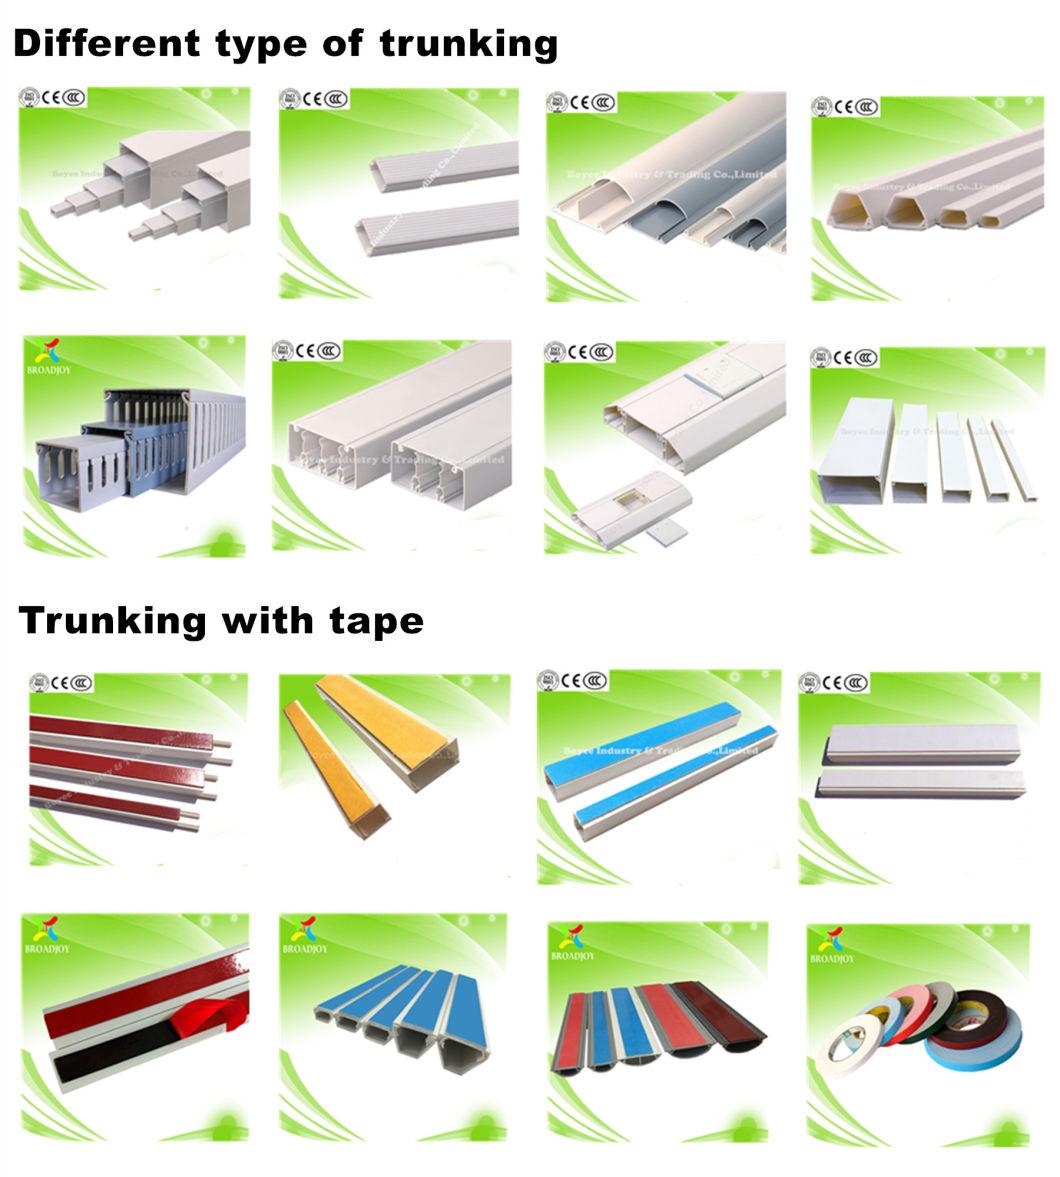 Self-Extinguishing PVC Cable Floor Trunking for Pipes